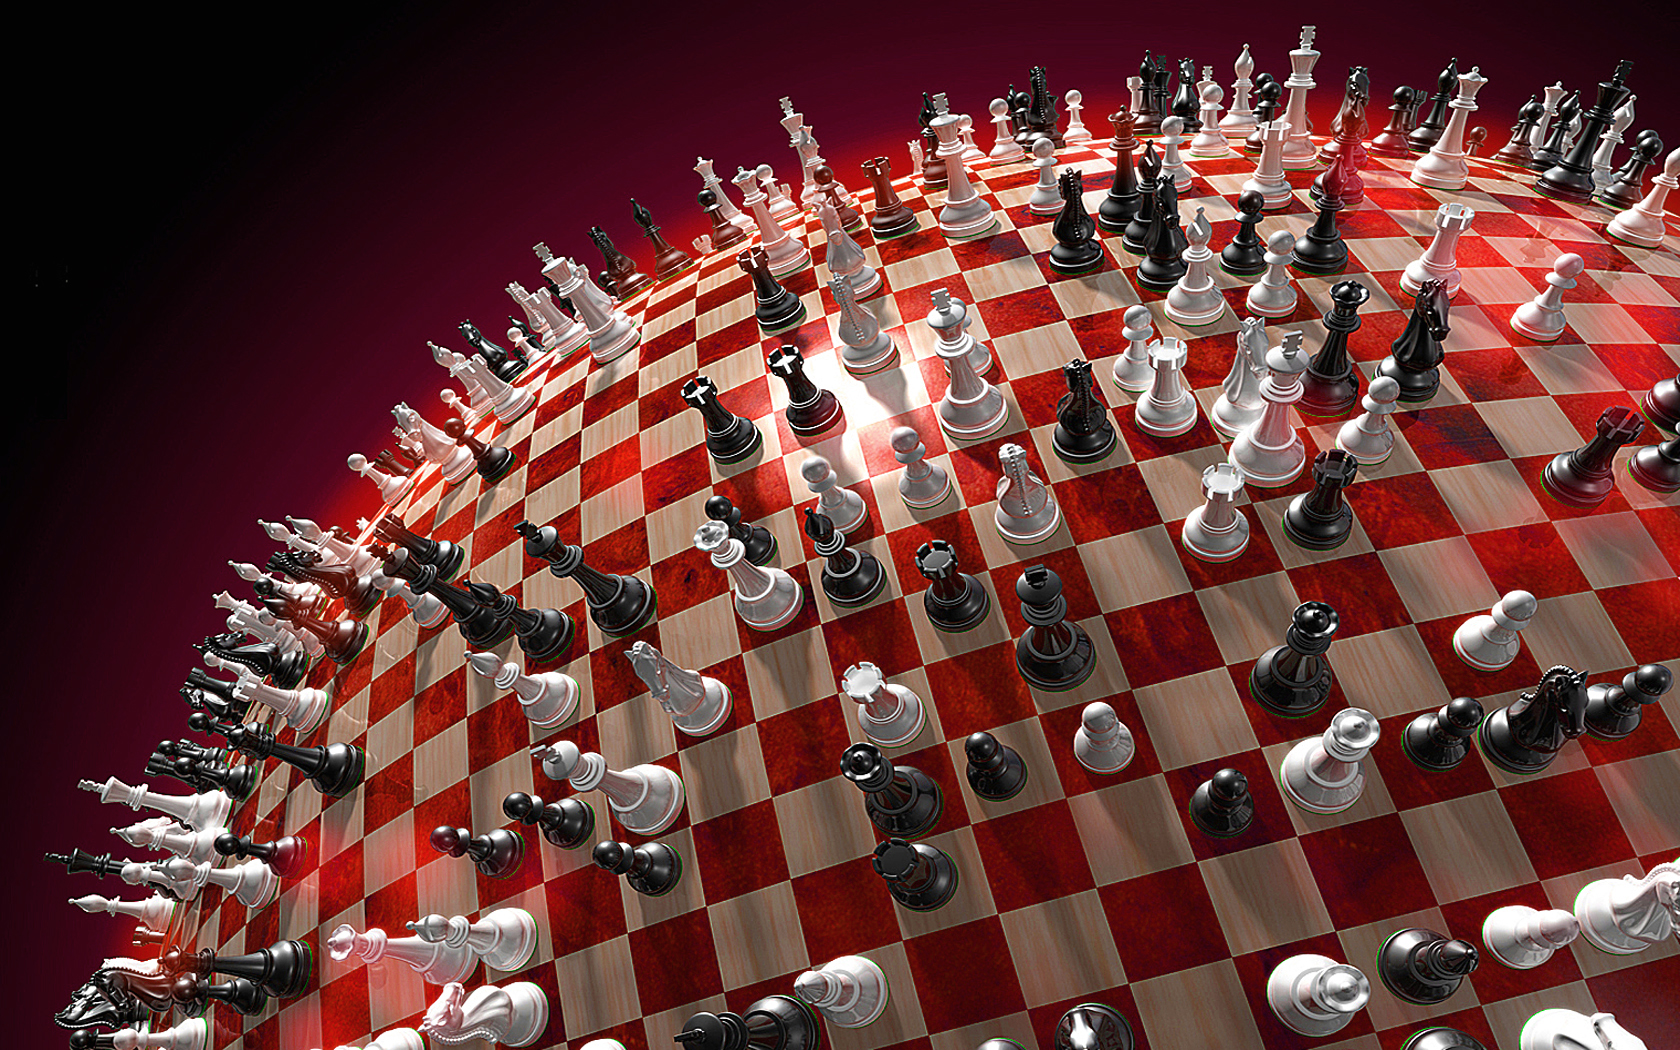 Round-chess-board-wallpapers 9738 1680x1050.jpg